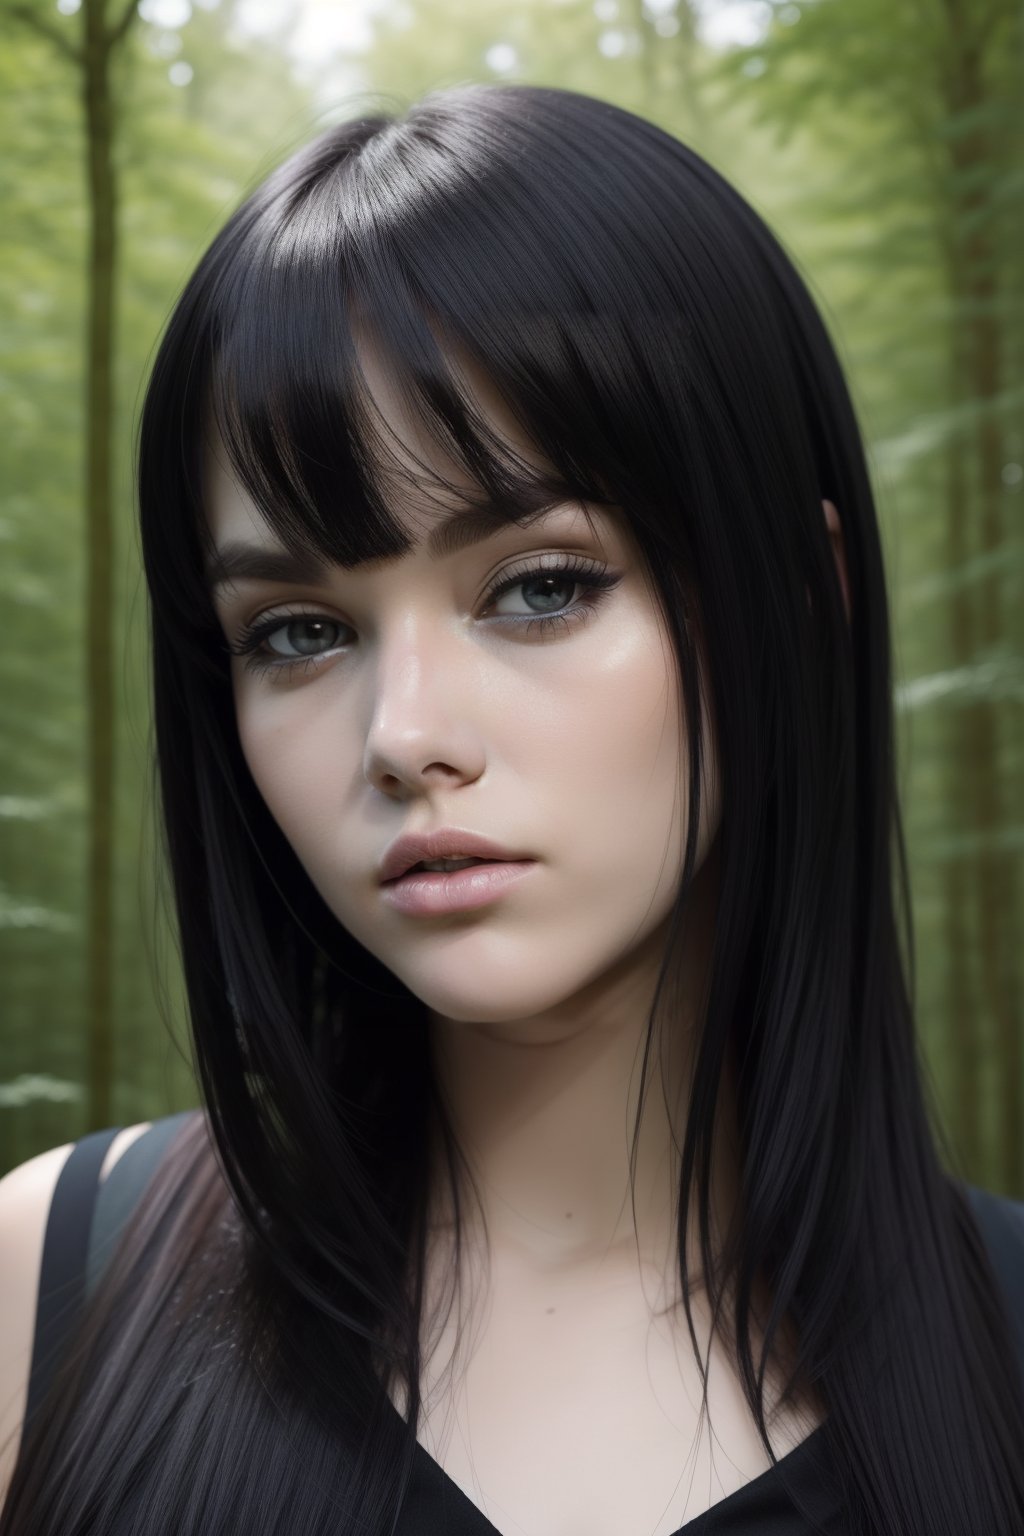 a portrait of wo_melclarke04,  head portrait, posing in the woods, perfect face structure, pale skin, serious, divine features, long and black hair with bangs, facing forward